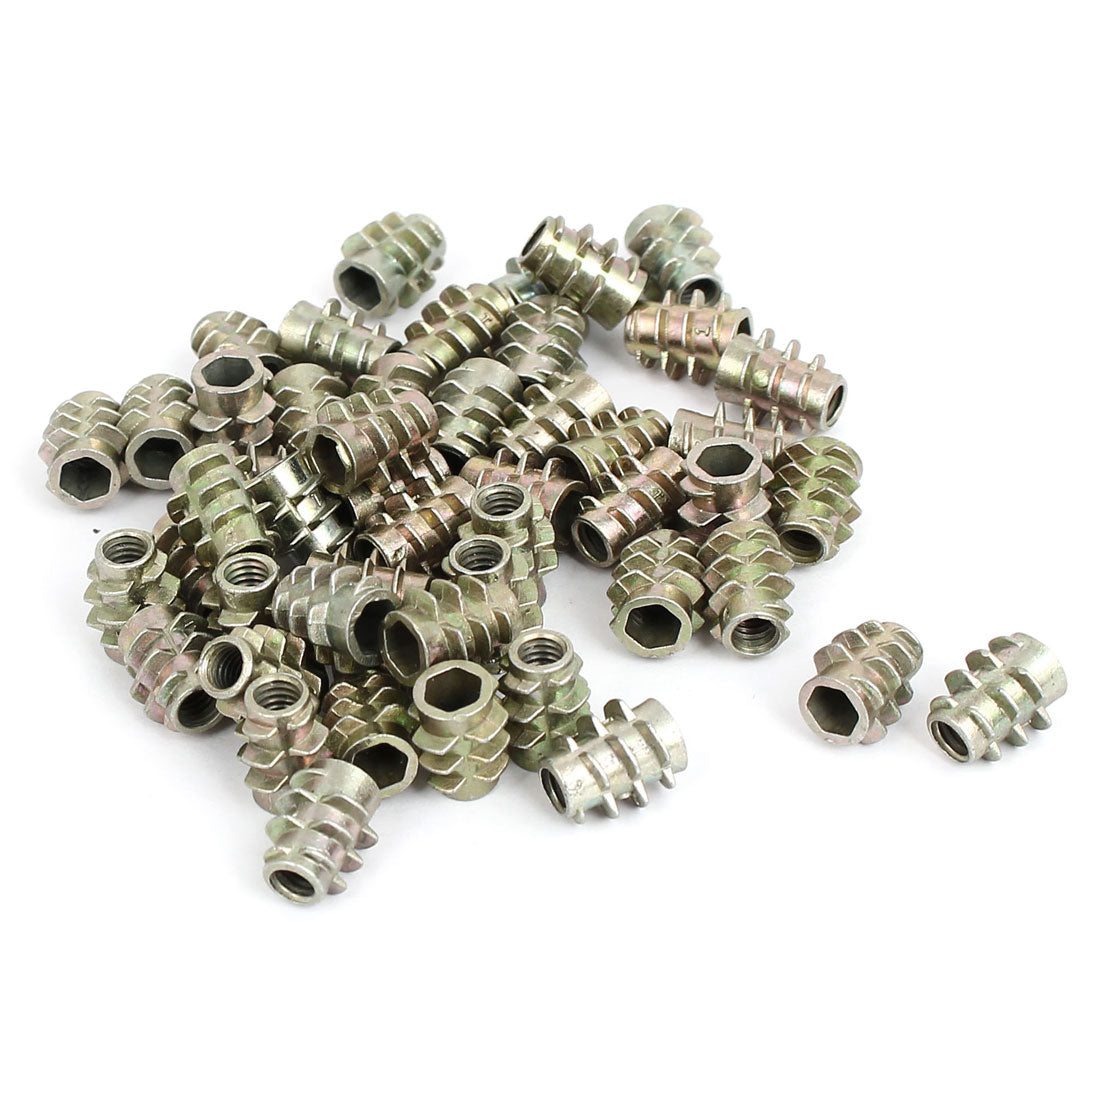 uxcell Uxcell M4x10mm Zinc Plated Hex Socket Screw in Thread Insert Nut 50pcs for Wood